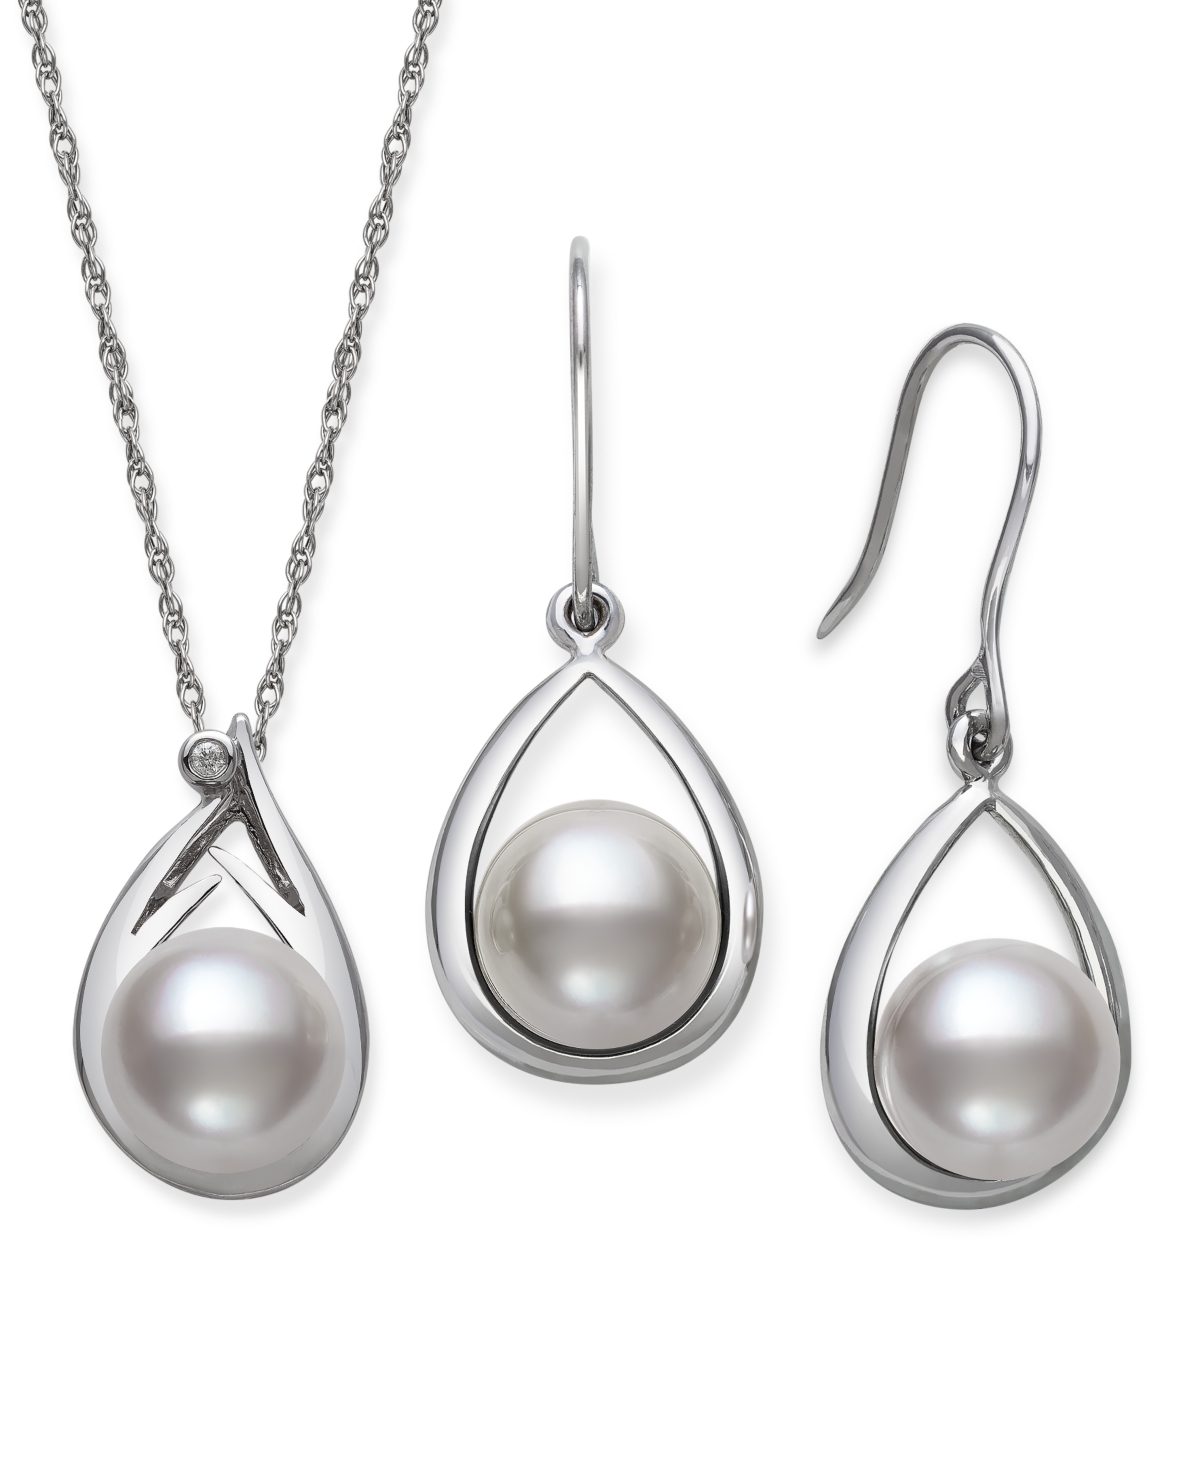 Cultured Freshwater Pearl (8-10 mm) and Diamond Accent Earring and Pendant Set in Sterling Silver - White